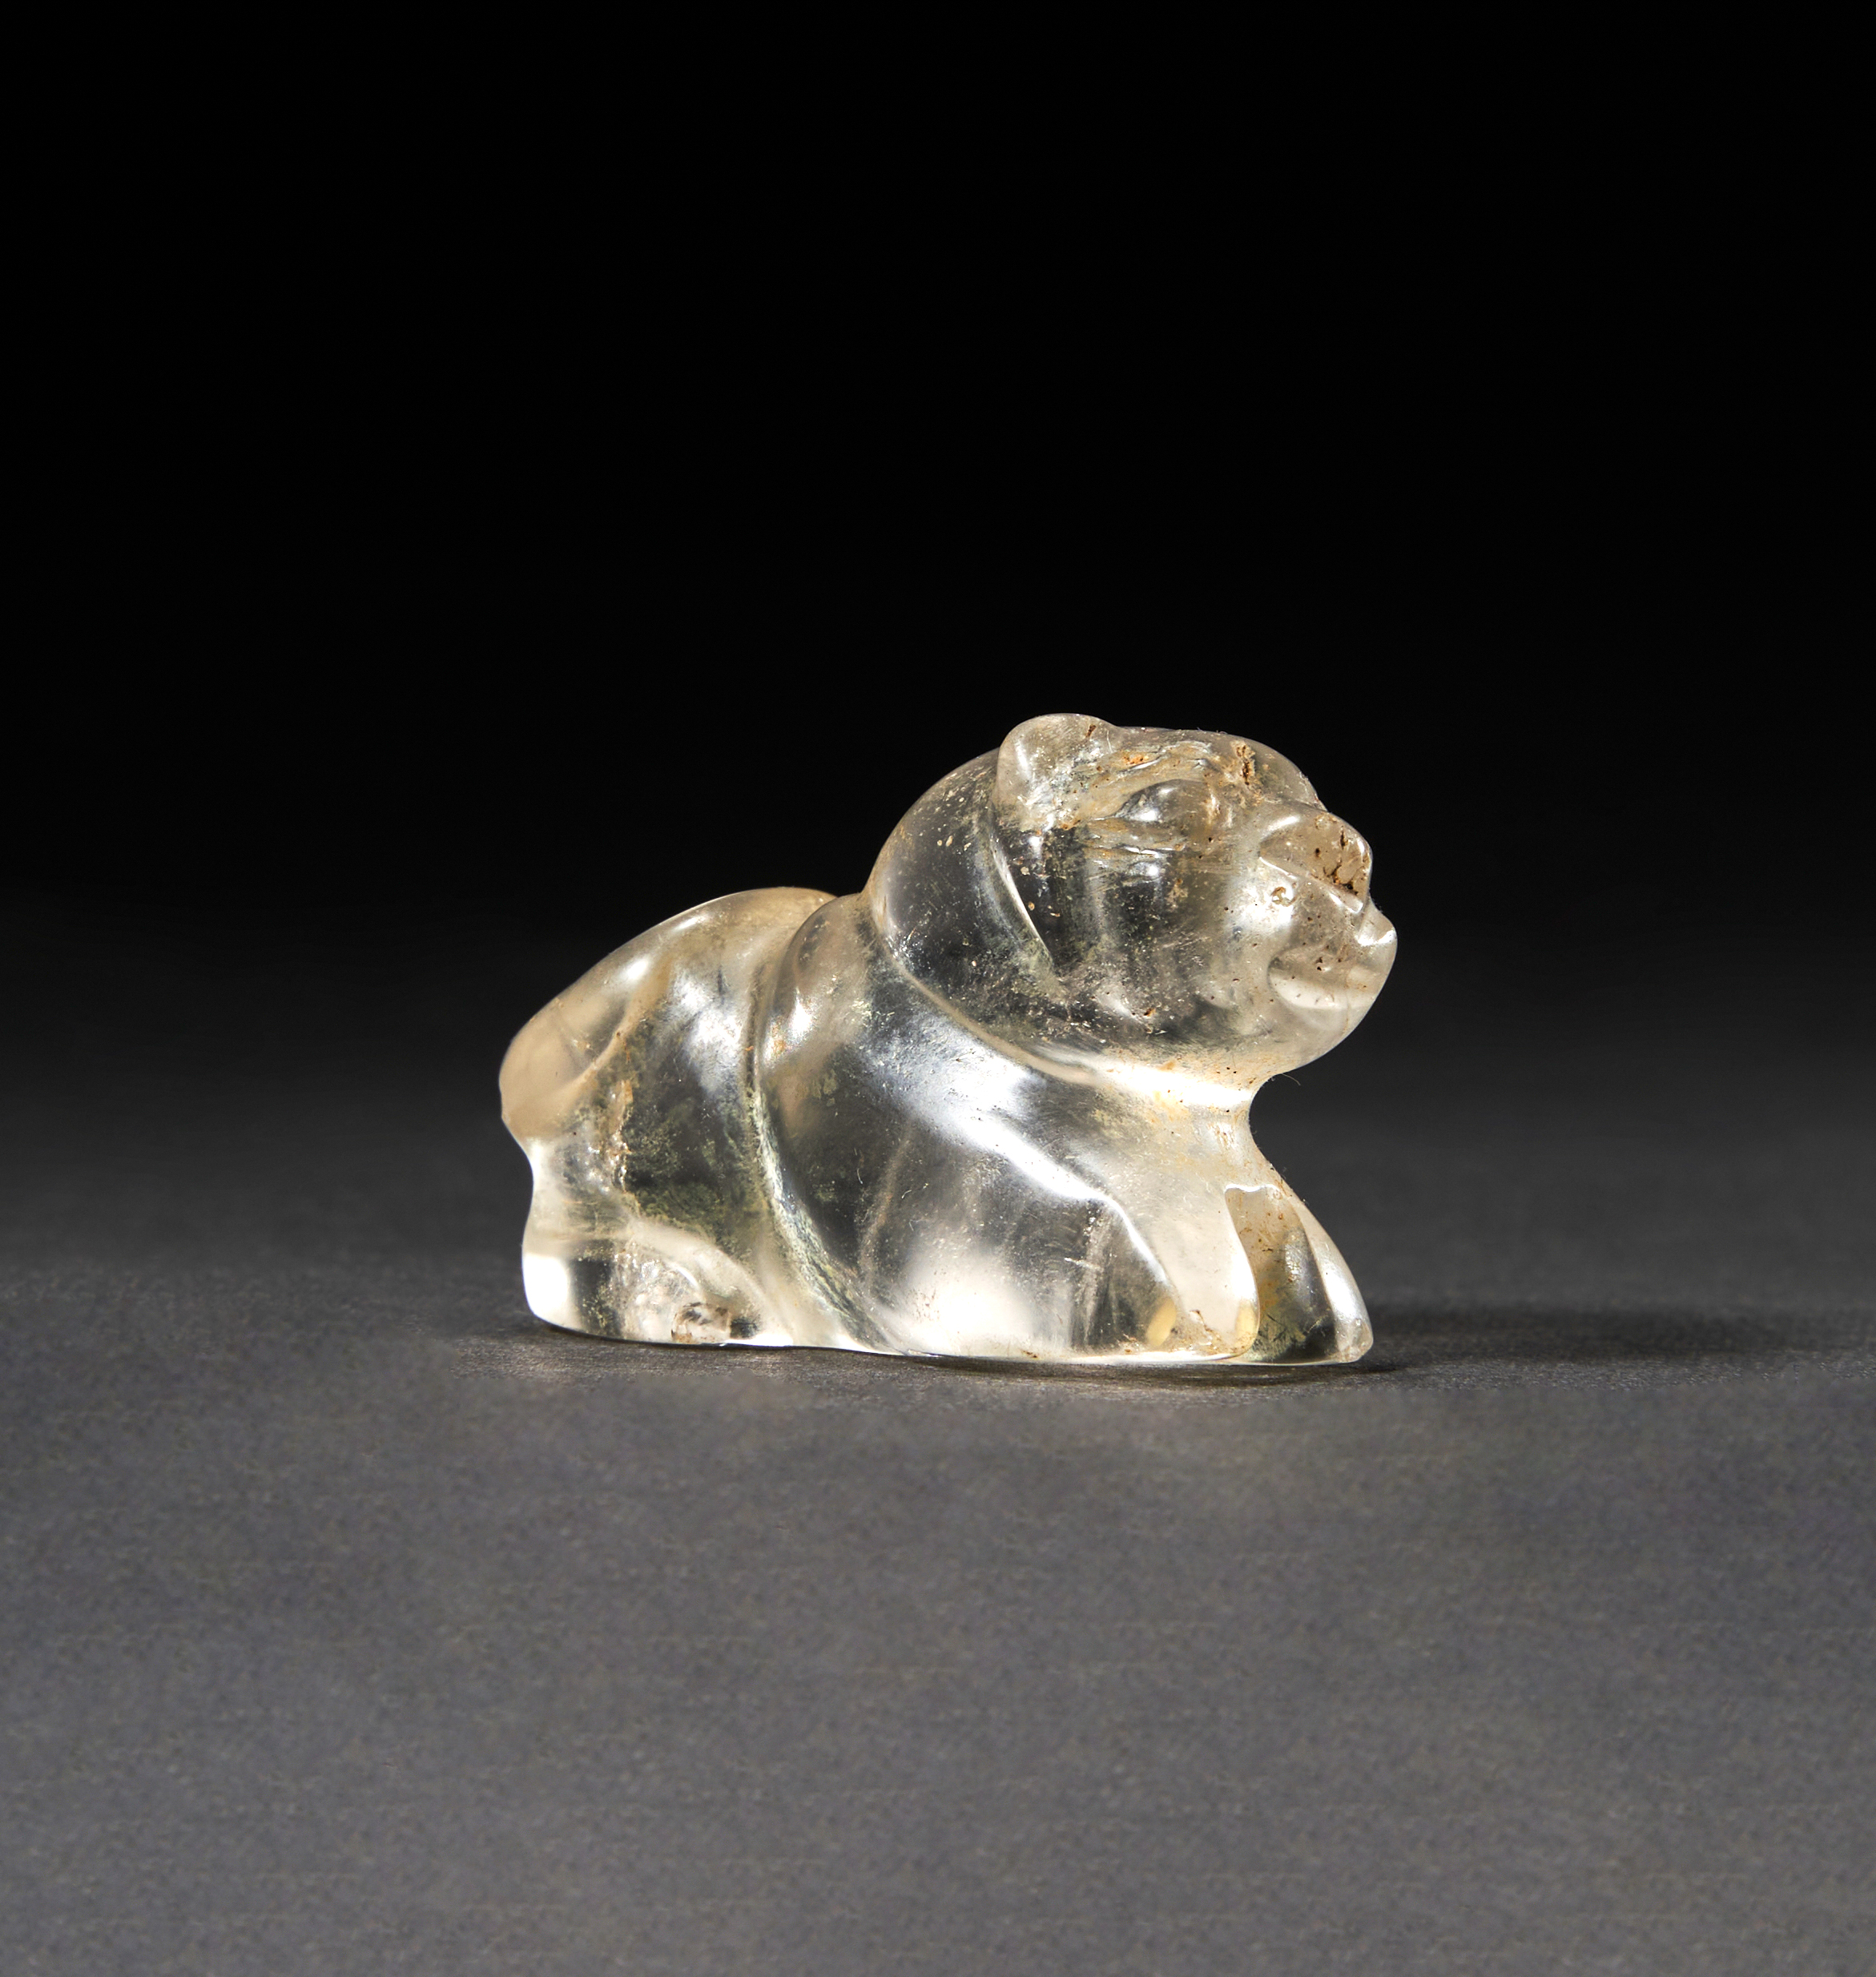 A GREEK ROCK CRYSTAL AMULET OF A RECUMBENT FELINE, CIRCA 5TH CENTURY A.D. OR LATER